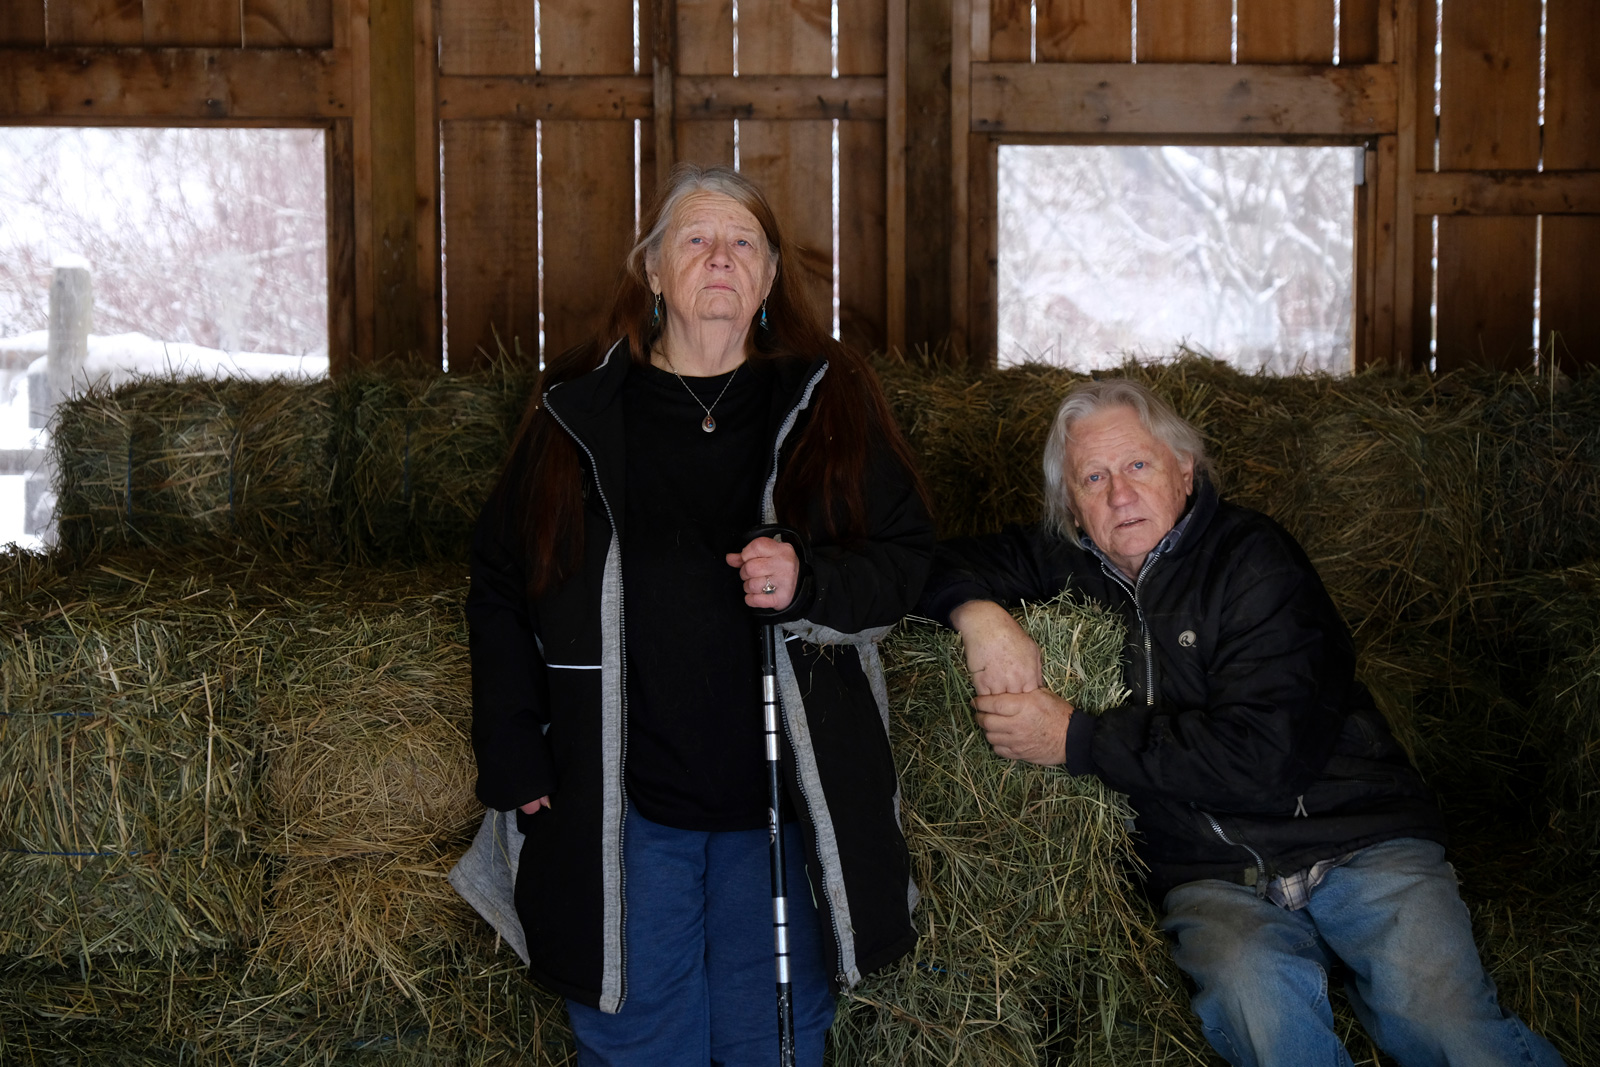 Two people standing in a barn